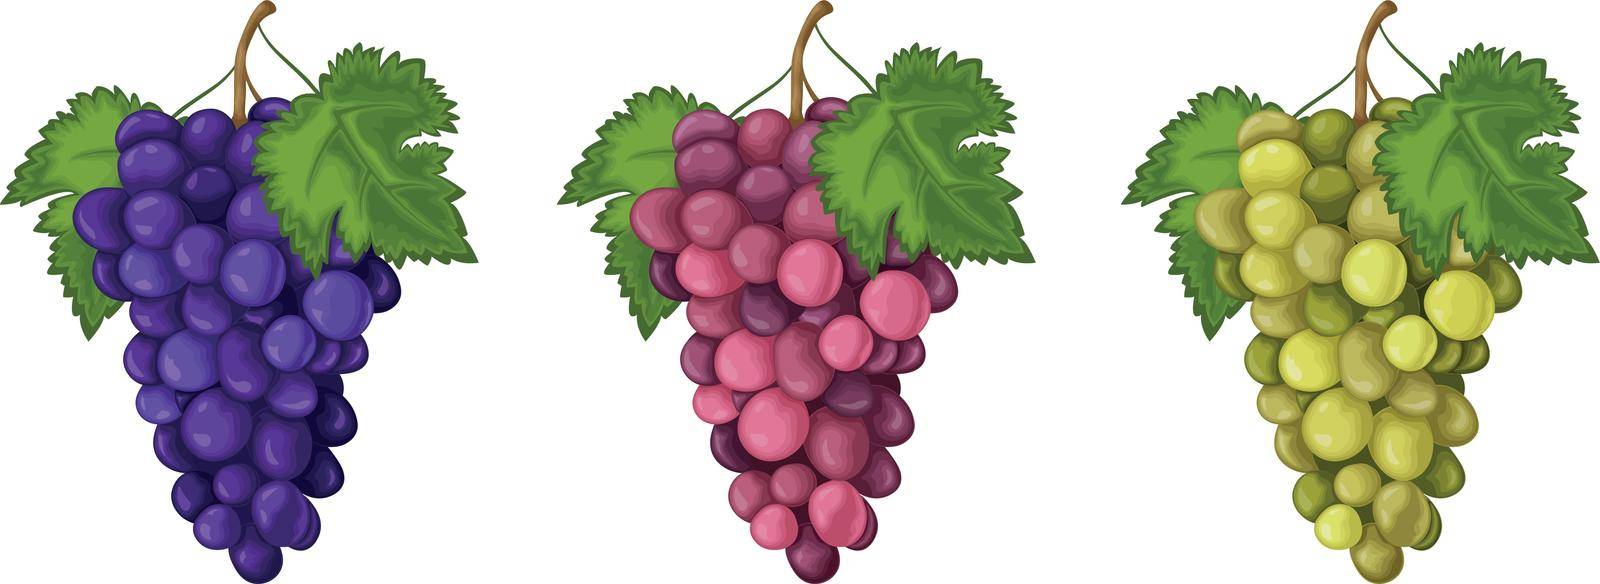 Grape. A set of grapes of three colors. Red blue and green grapes. Sweet ripe berries. Vegetarian organic product. Vector illustration.